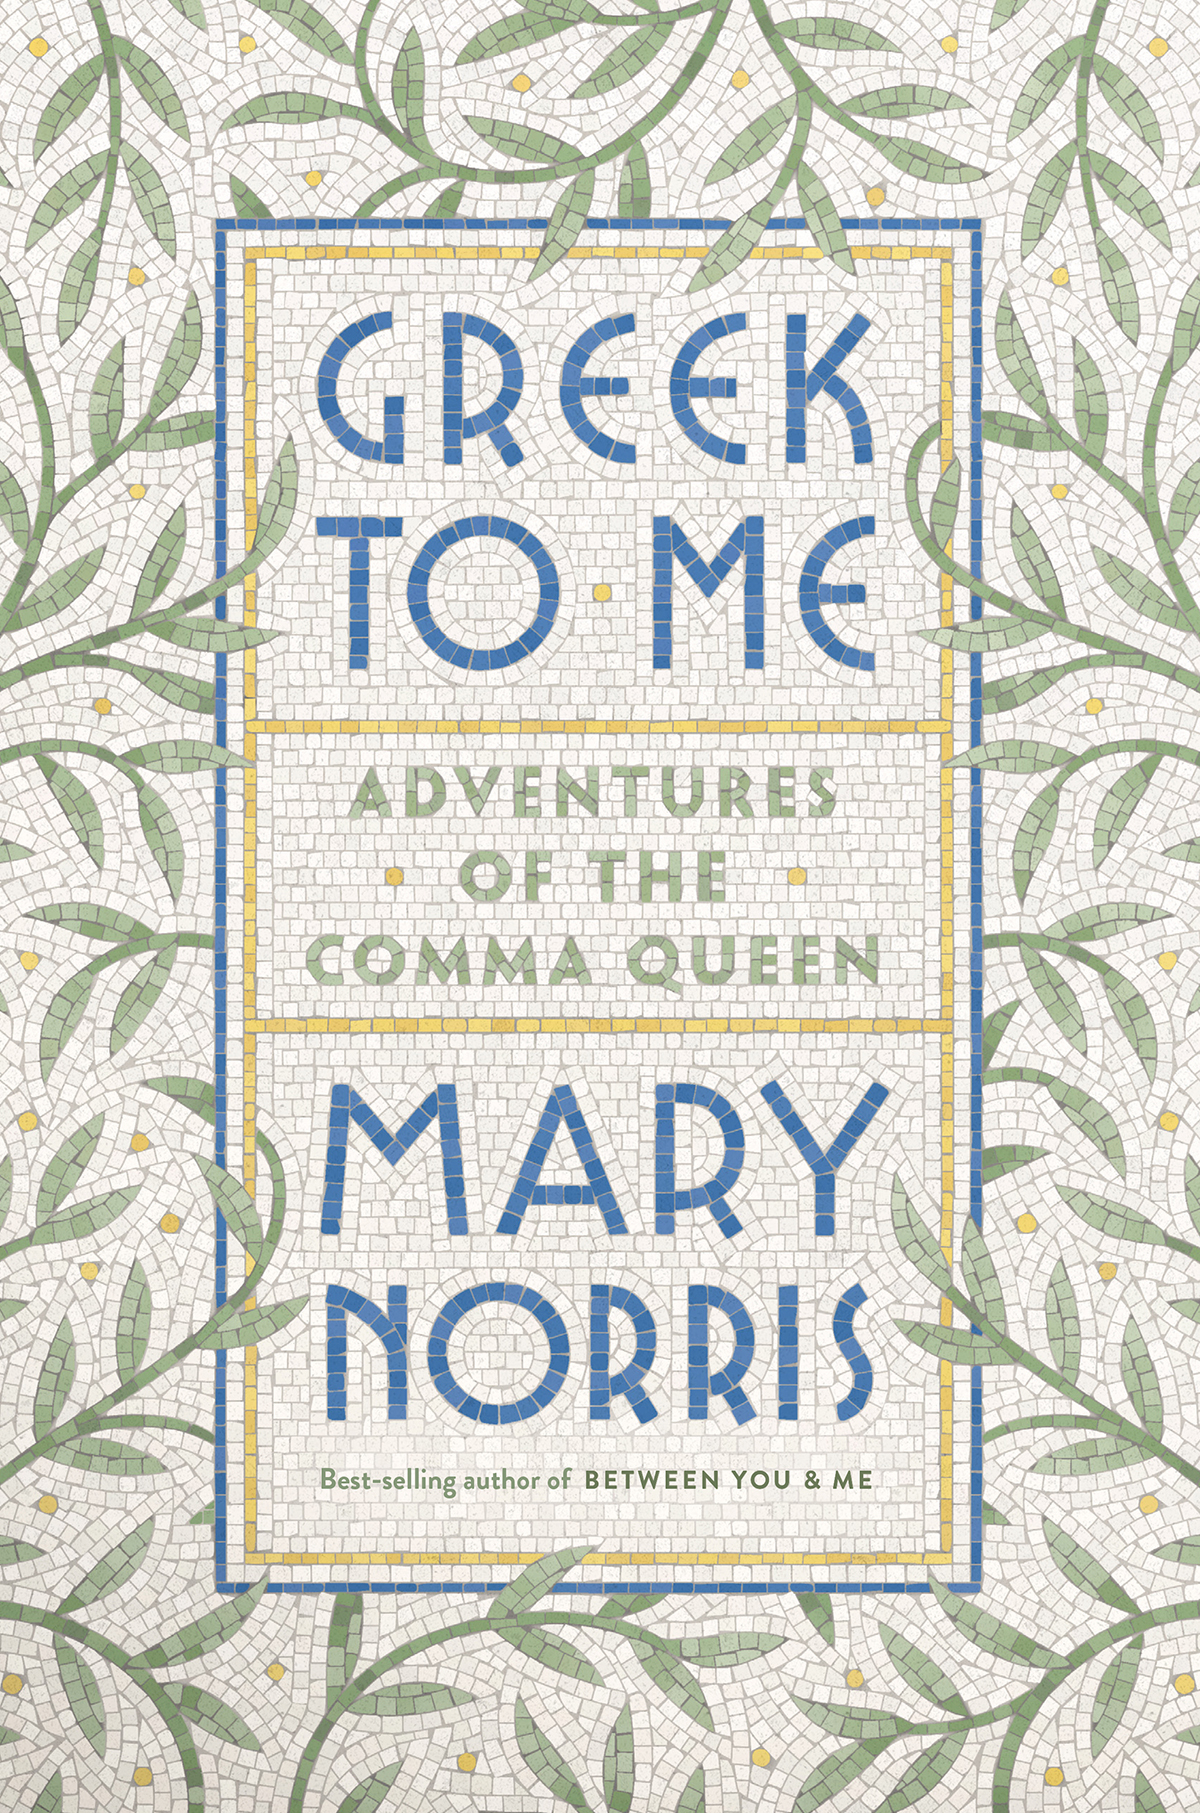 ALSO BY MARY NORRIS Between You Me Confessions of a Comma Queen GREEK TO - photo 1